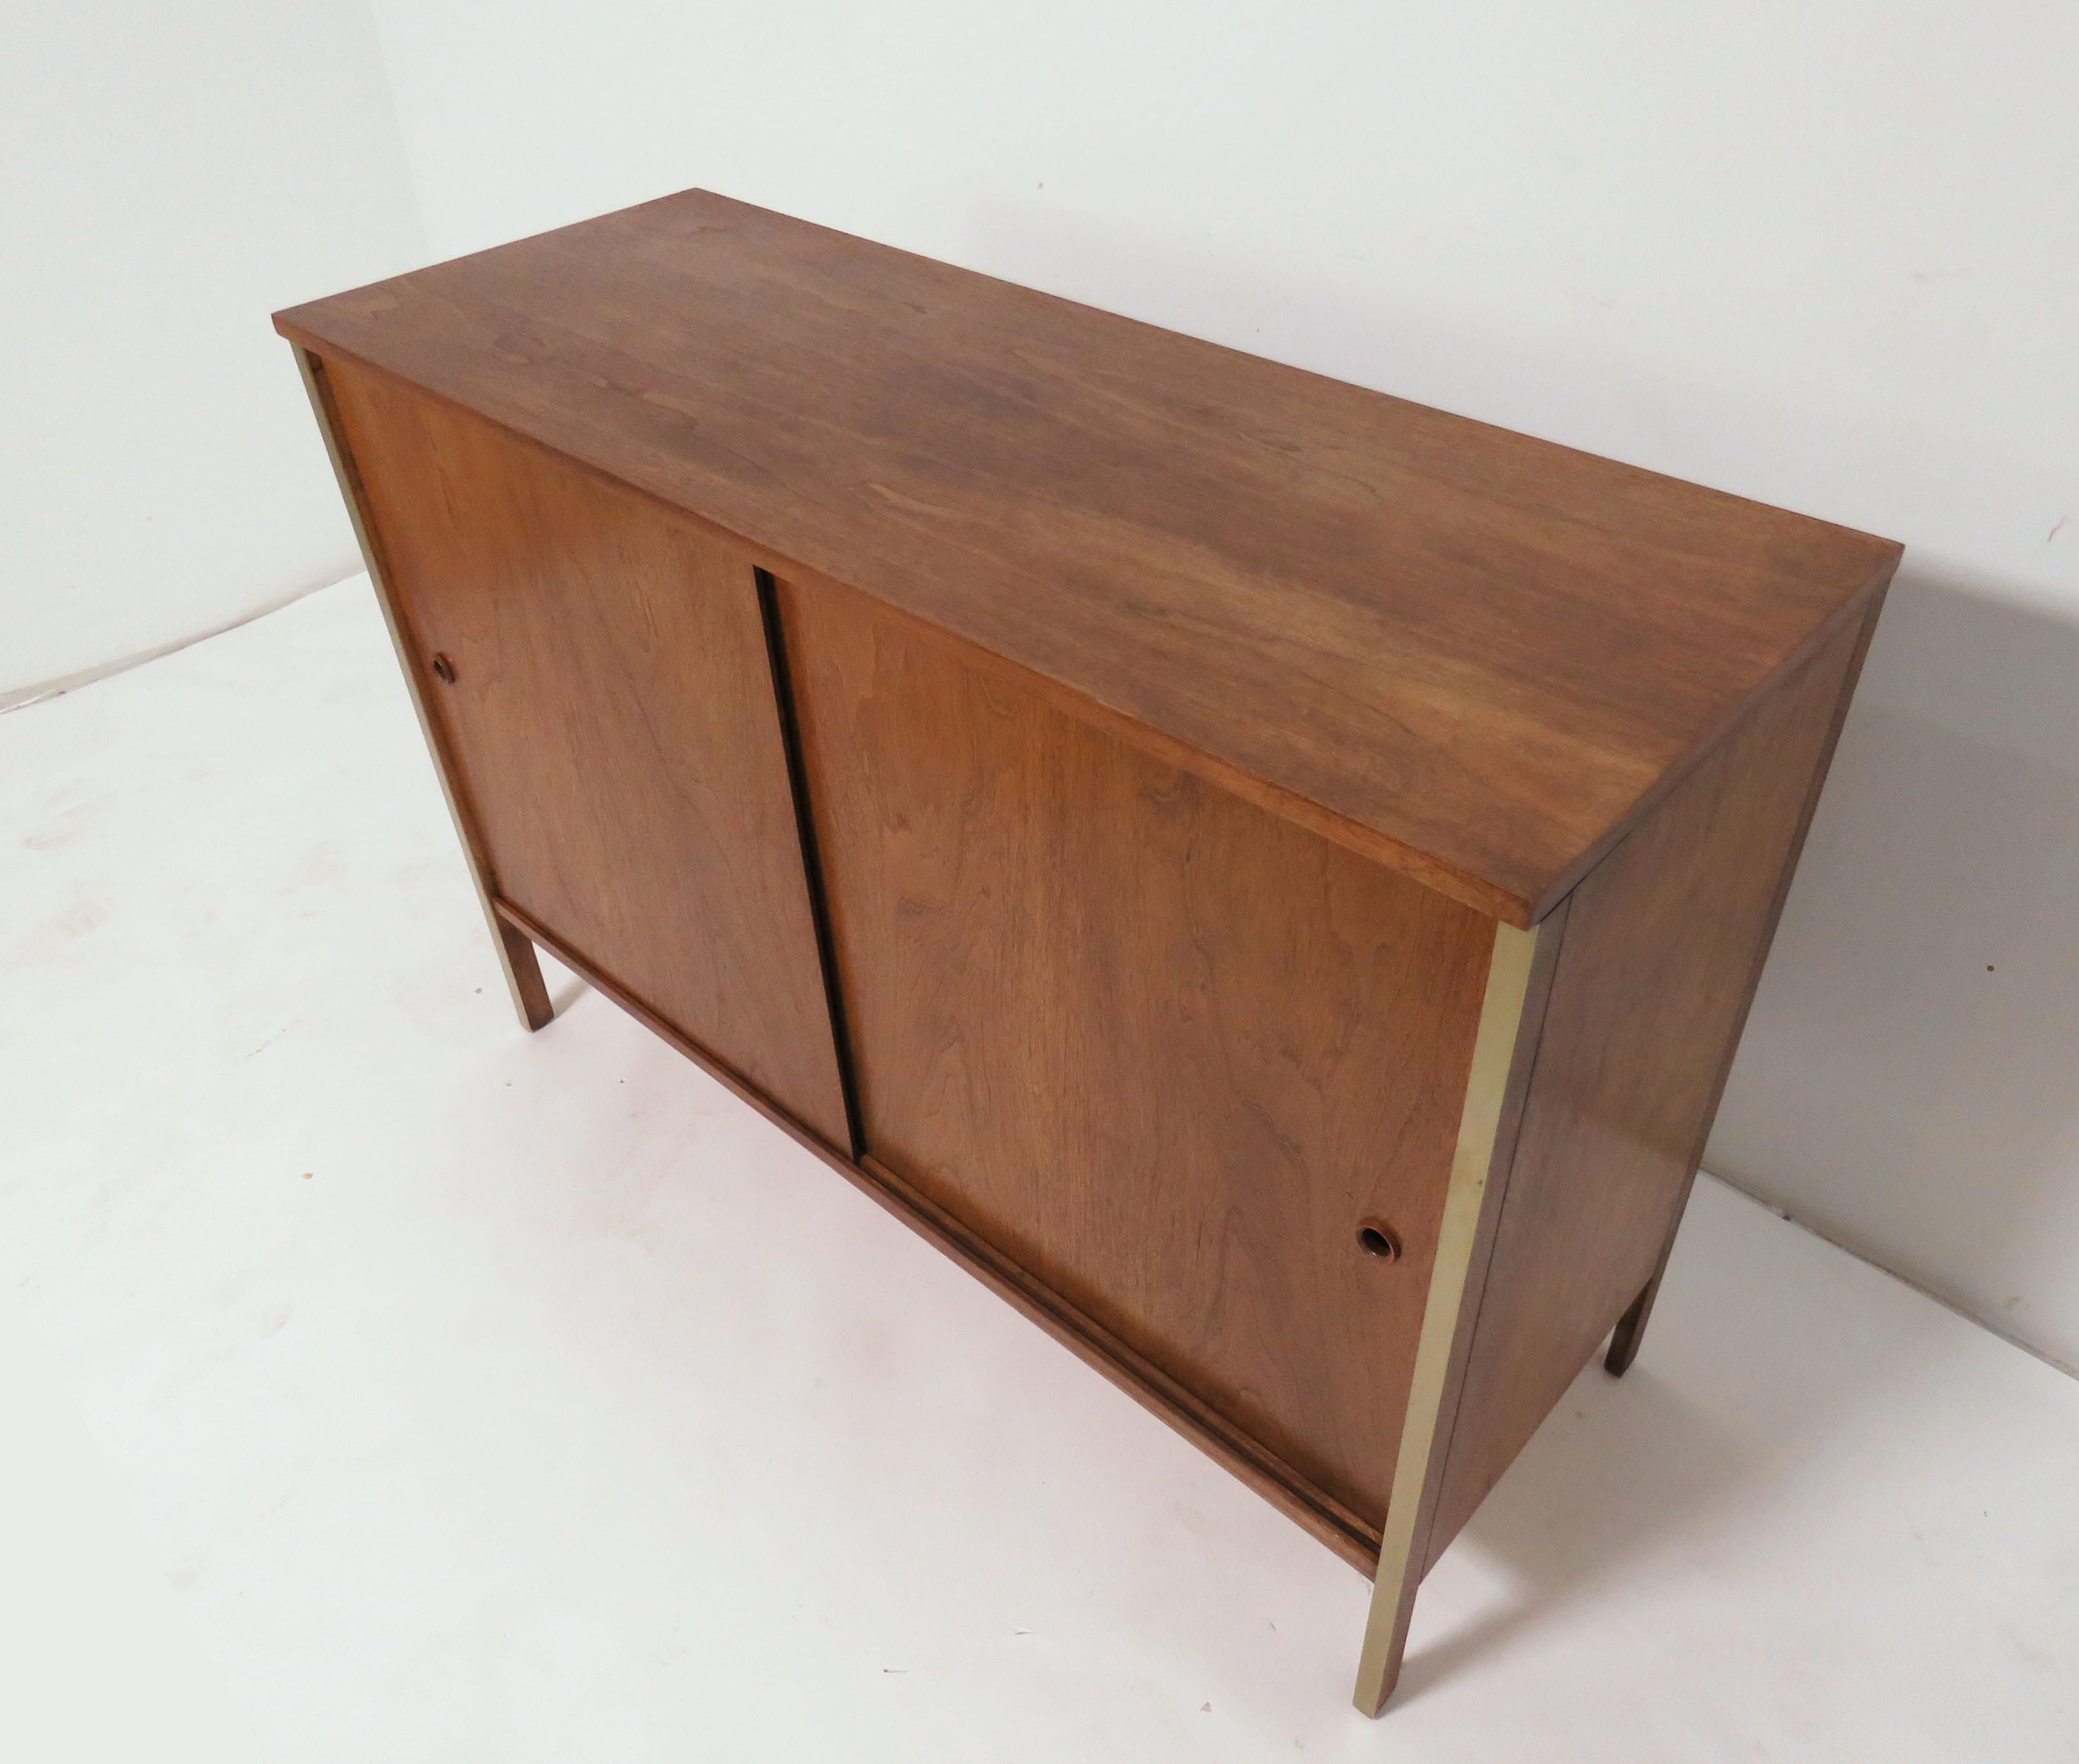 A Classic two-door cabinet designed by Paul McCobb for Calvin Furniture, circa early 1960s.